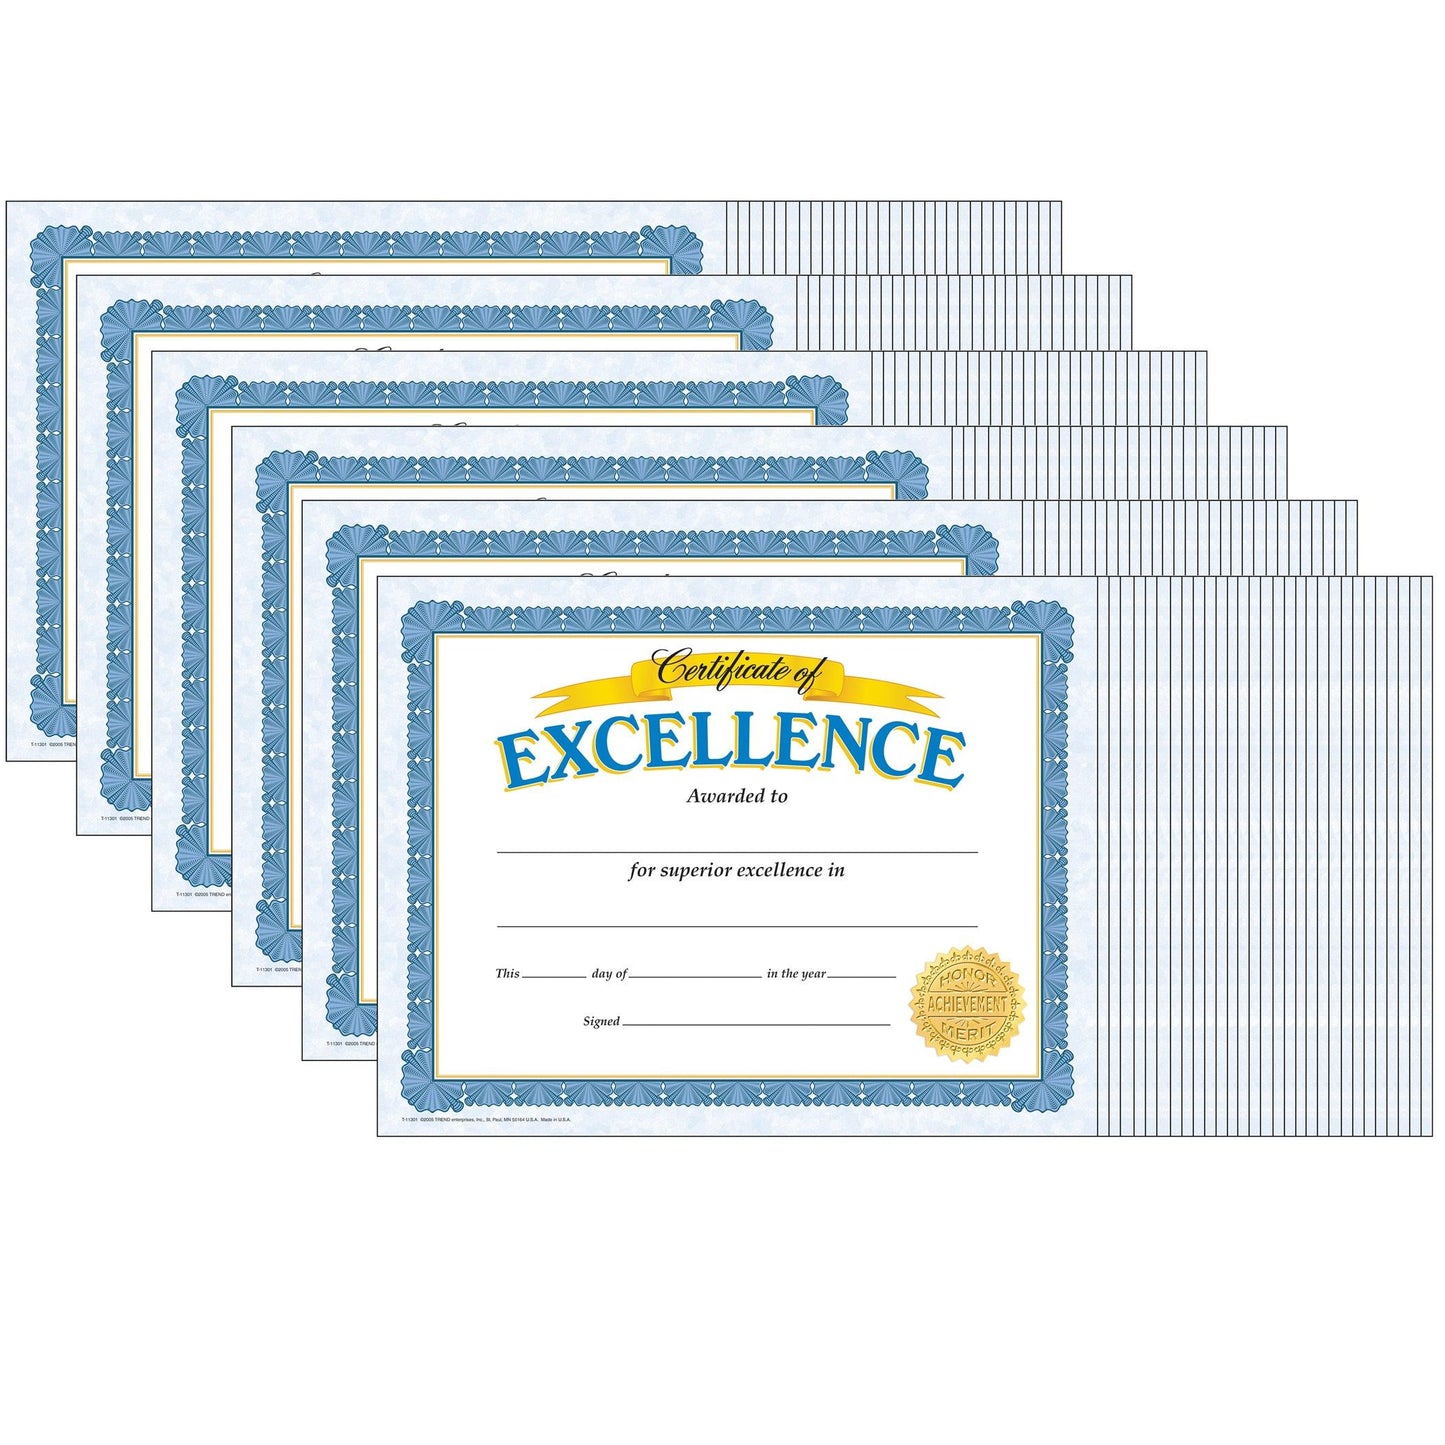 Certificate of Excellence Classic Certificates, 30 Per Pack, 6 Packs - Loomini